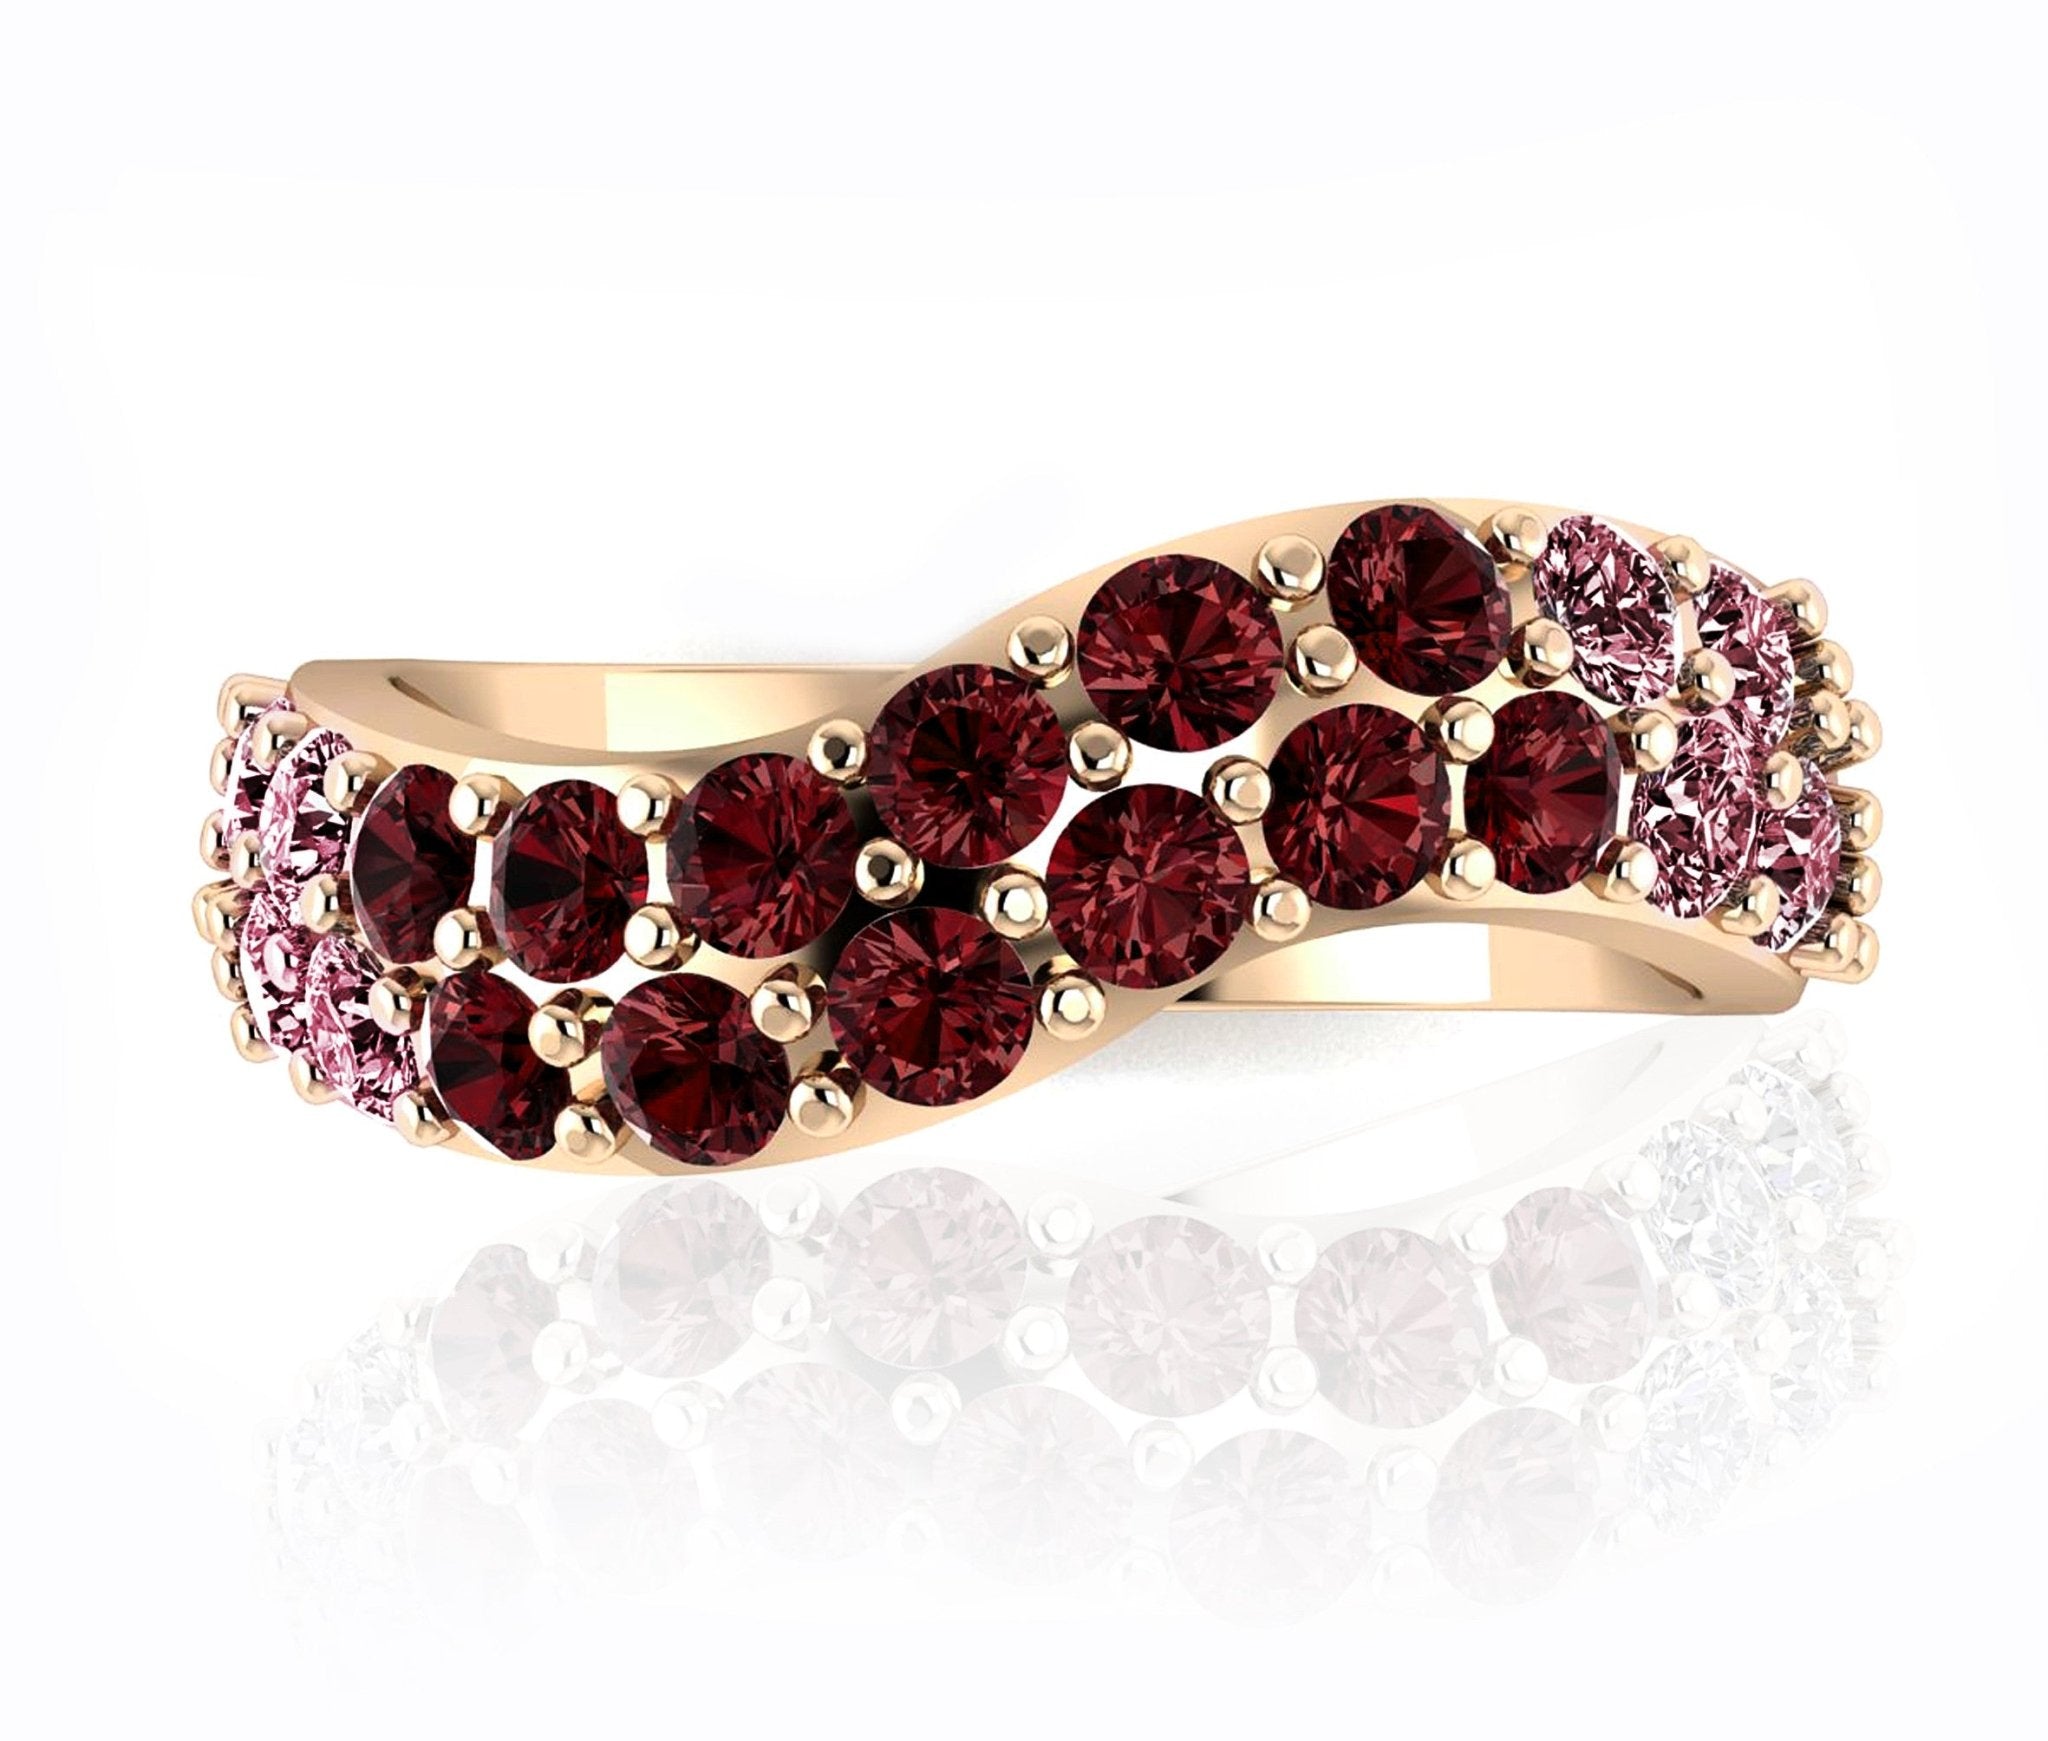 18ct Rose gold round rose spinel and diamond dress ring - ForeverJewels Design Studio 8